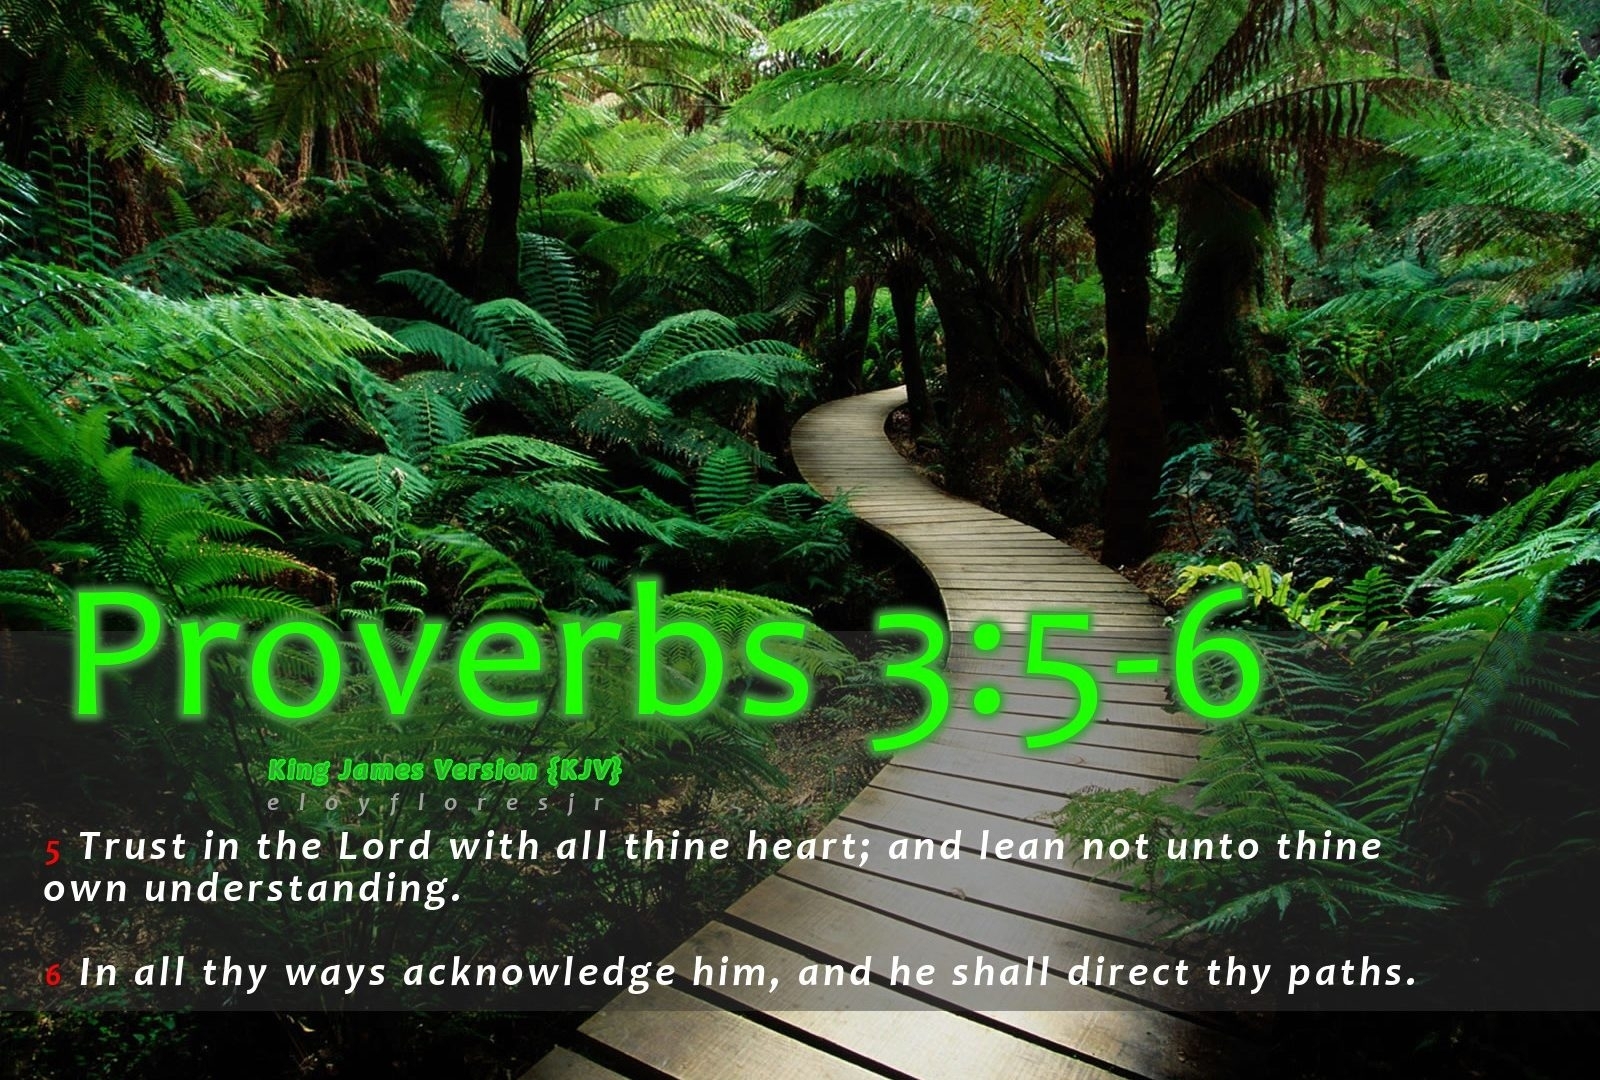 Title : misc: proverbs bible verse wallpaper wide for hd 16:9 high Dimensio...